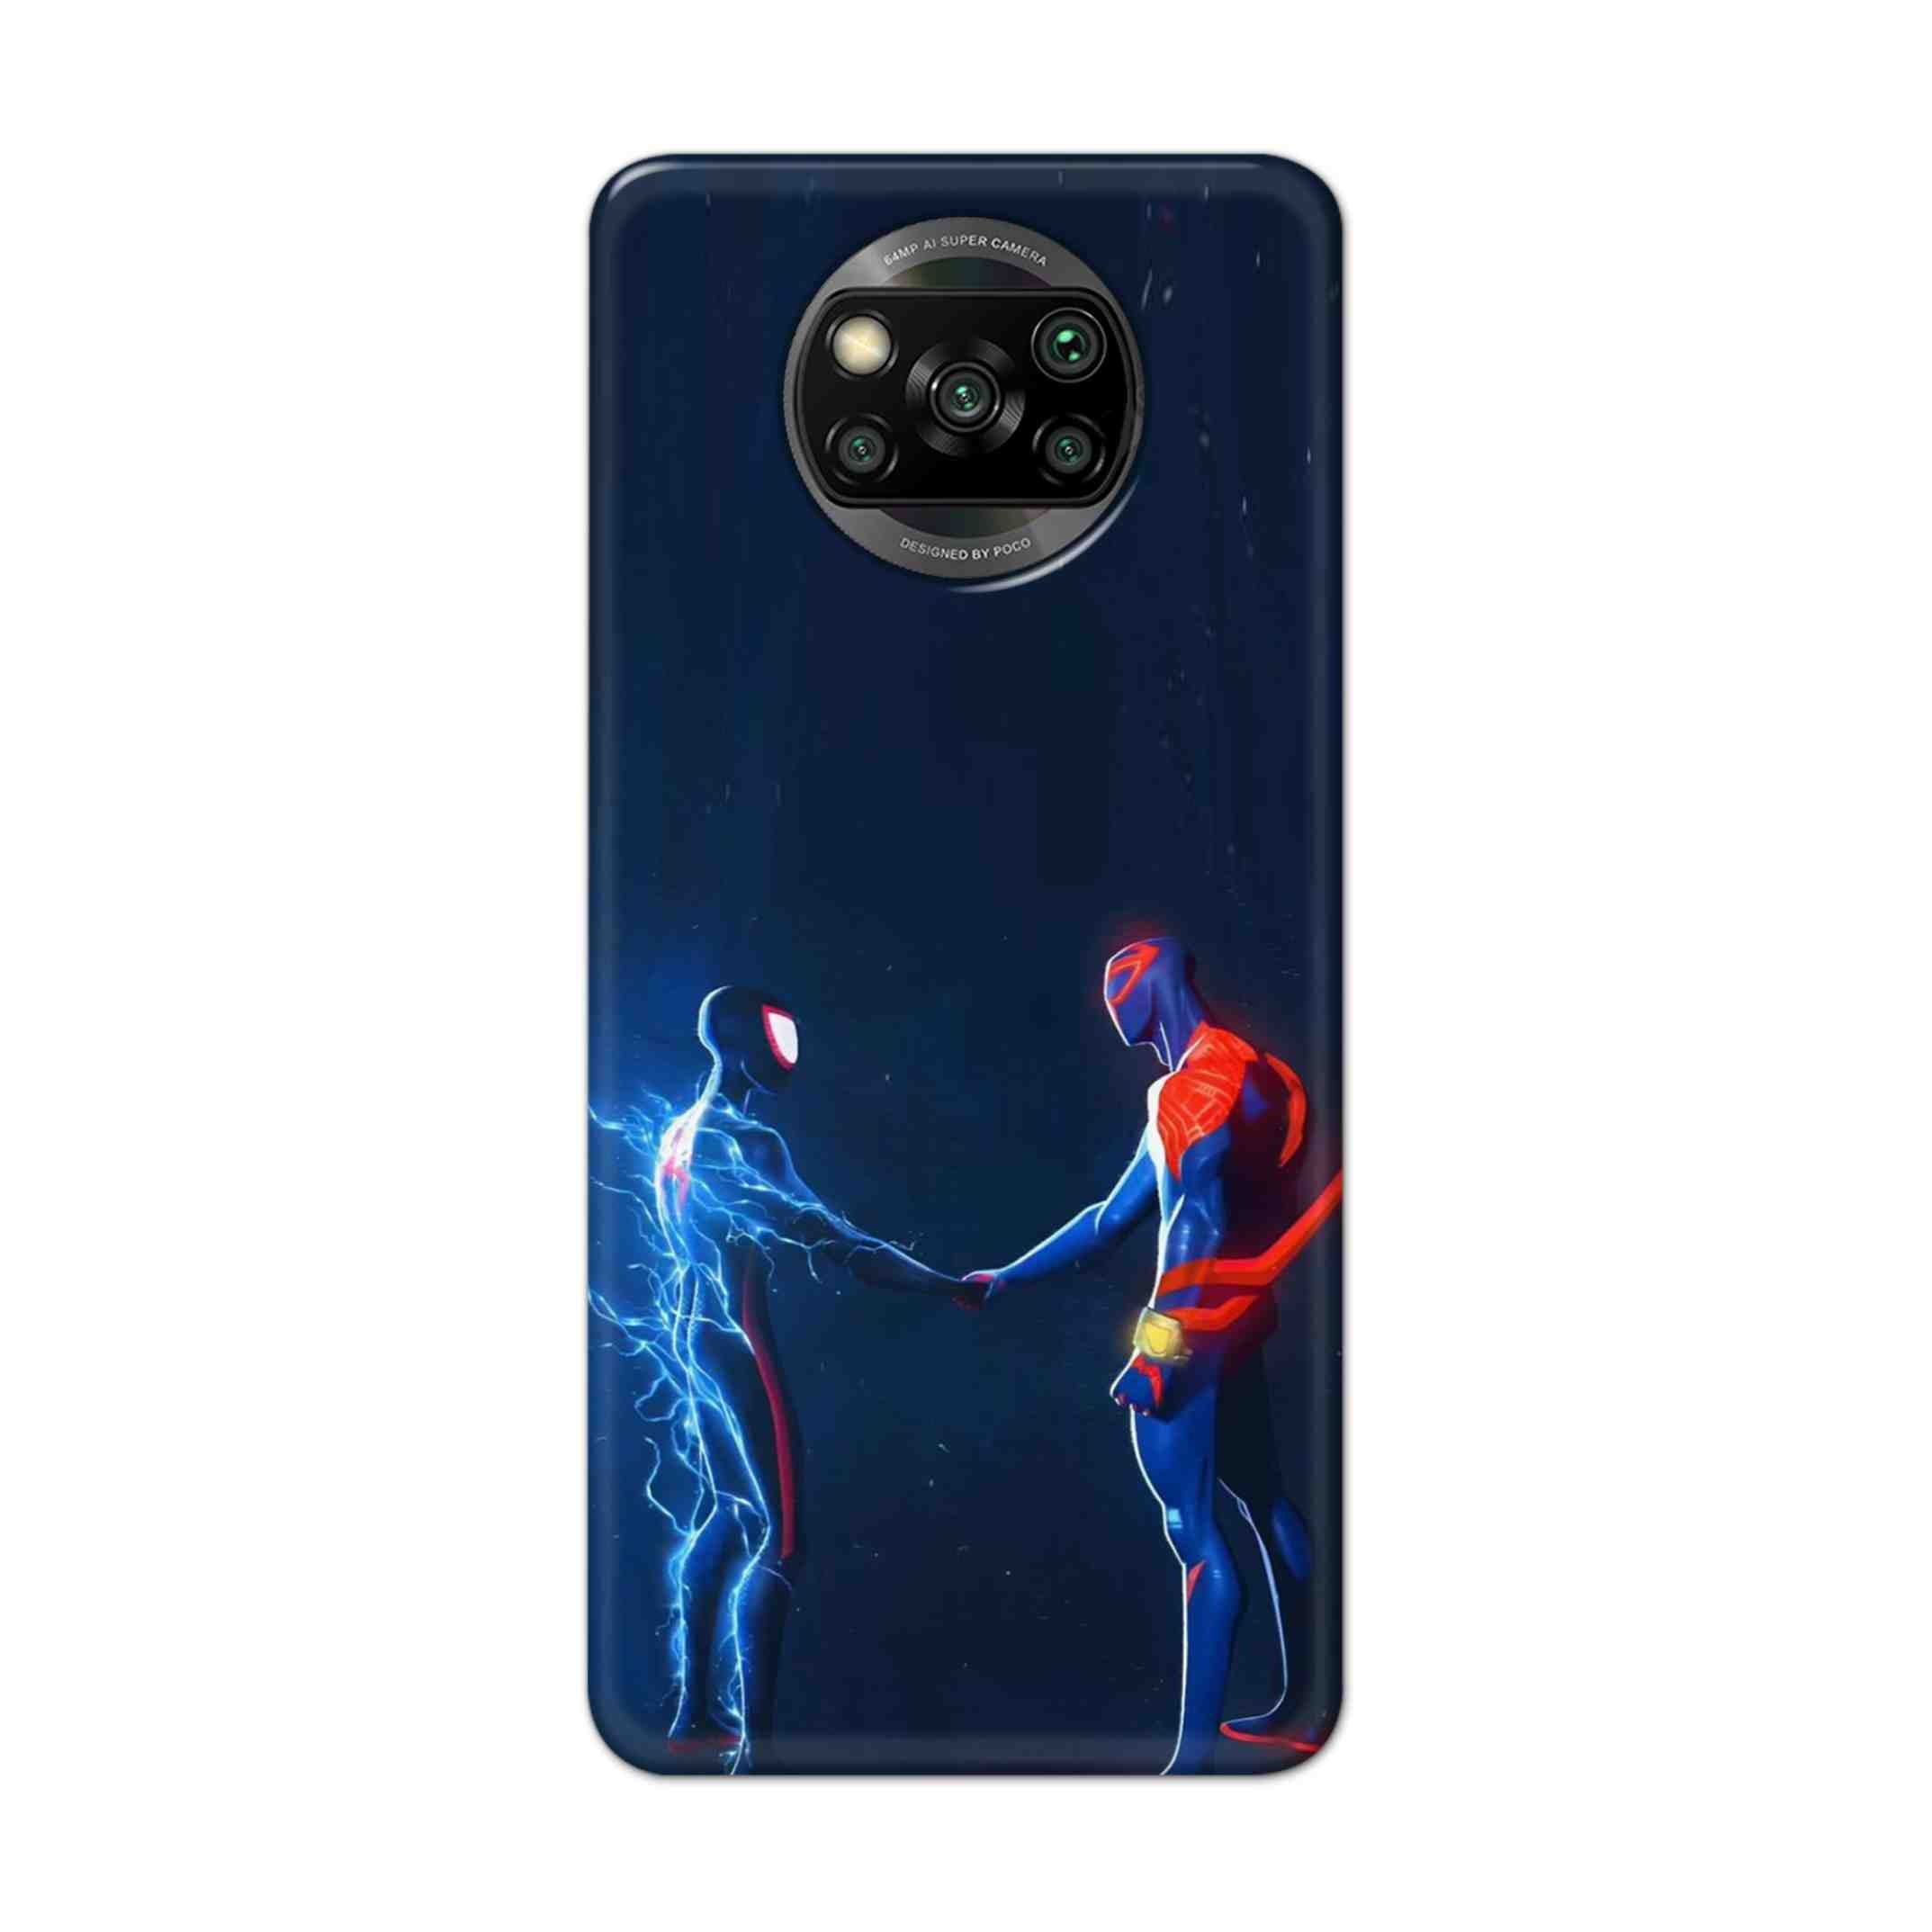 Buy Miles Morales Meet With Spiderman Hard Back Mobile Phone Case Cover For Pcoc X3 NFC Online